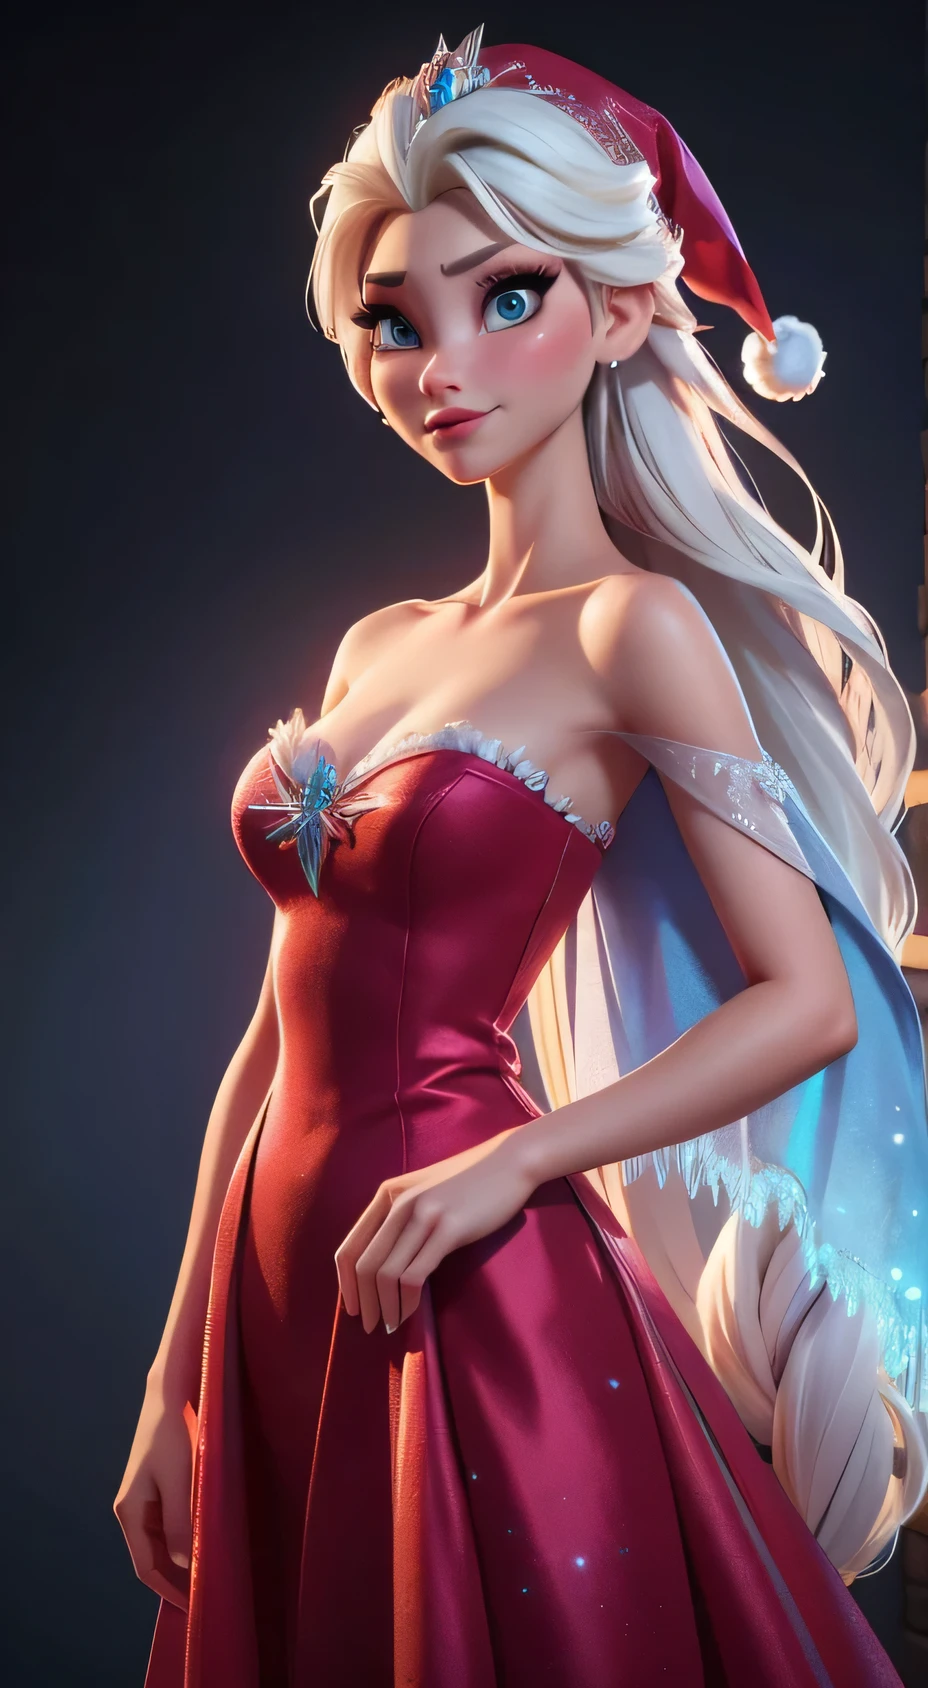 Generate an realistic image of Elsa from Frozen, real character Frozen elsa, dressed in modern fashion for a New Year's . HDR 8K texture dress, visual render Elsa, Elsa should be wearing a red, delicate long dress , along with a New Year's santa hat. The dress should be stylish and suitable for a princess. New Year's dress with real feathers and tassels